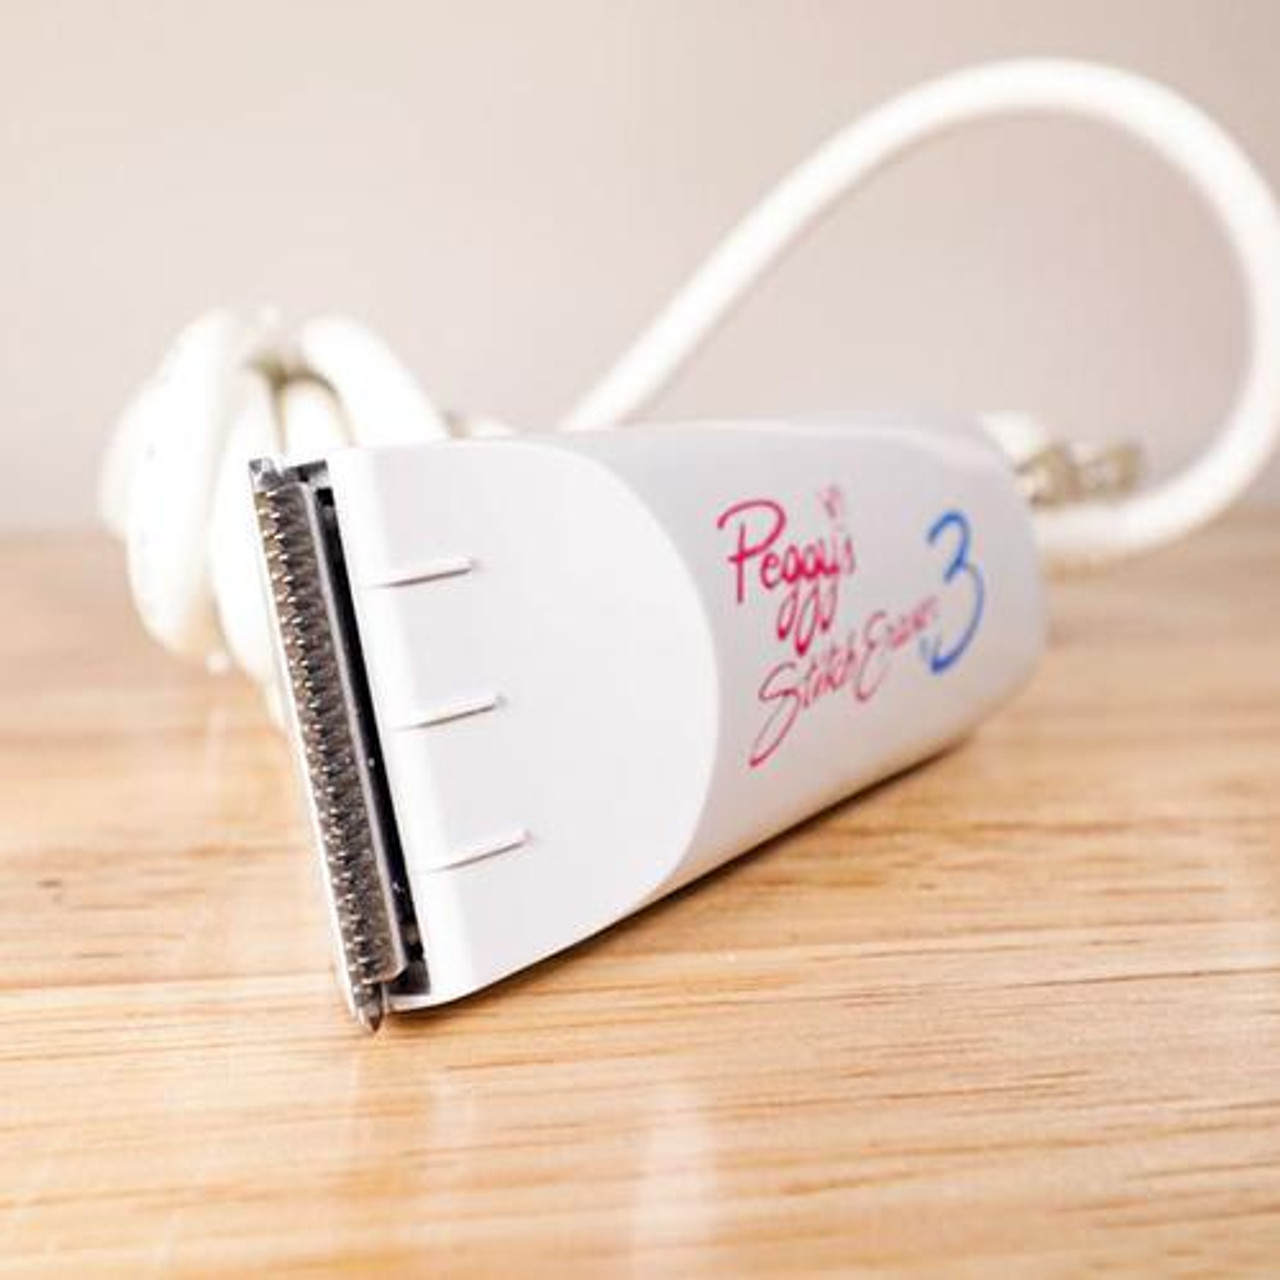 .com: Peggy's Stitch Eraser 3 - The Original Stitch and Embroidery  Removal Tool - Also Useful for Sewing and Quilting (Renewed)